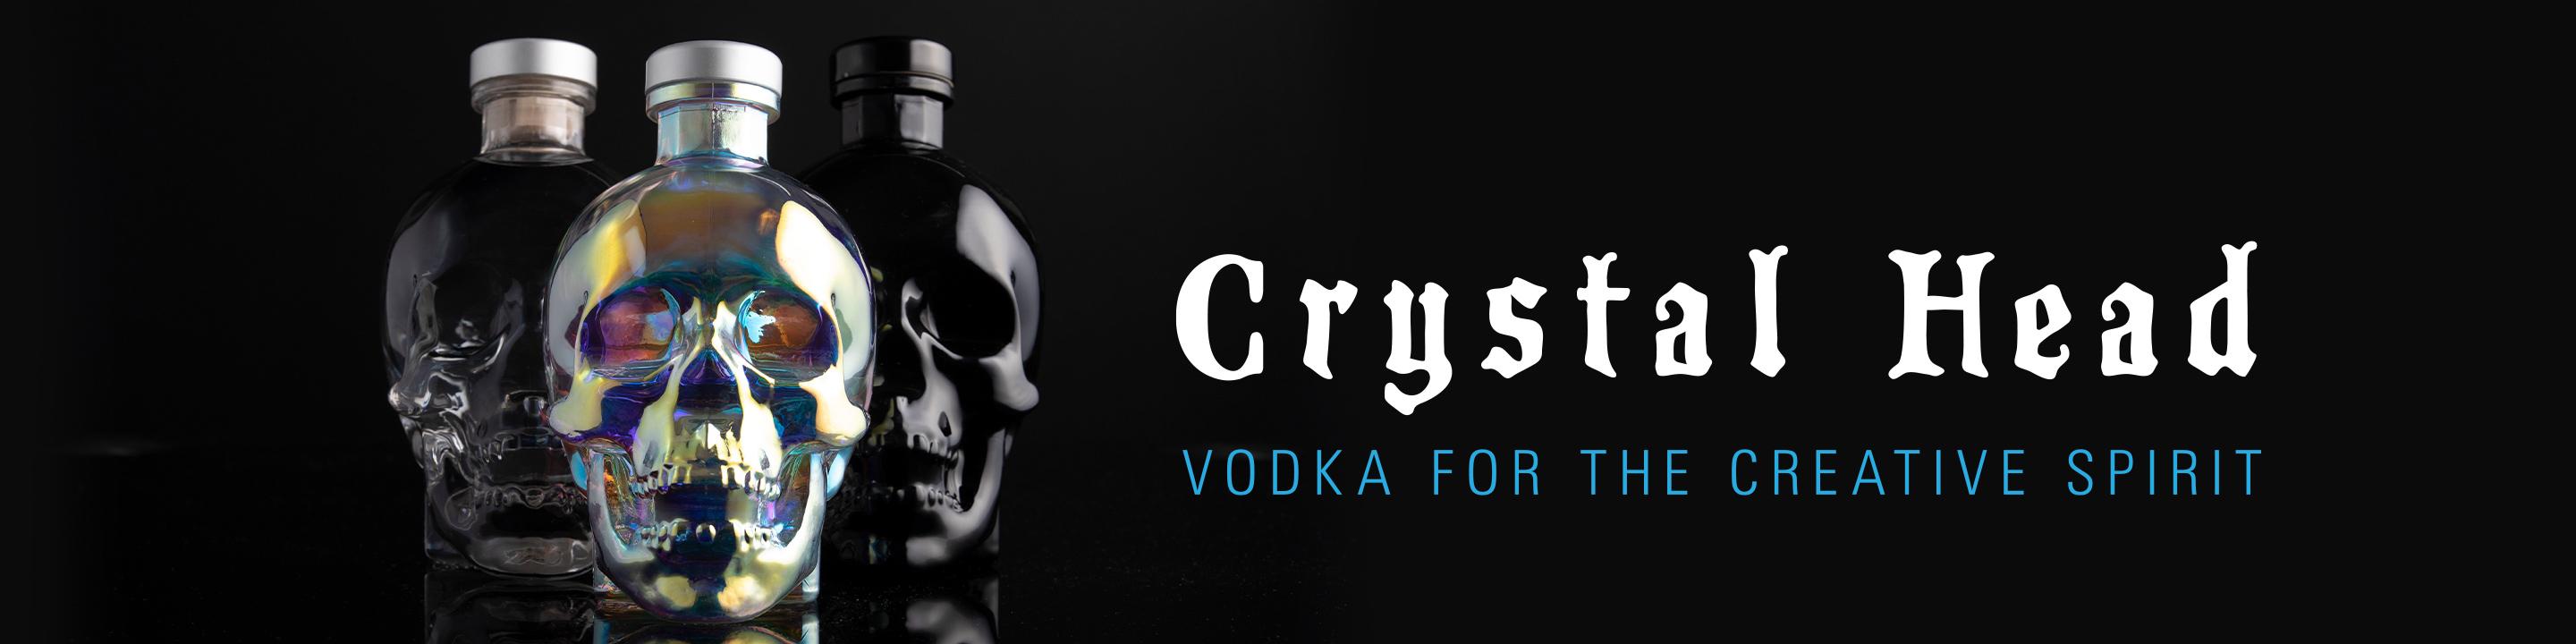 Creativity is at the heart of everything we do. It is why we craft the purest, smoothest vodka with one of a kind packaging and imaginative thinking. Crystal Head uses only the highest-quality ingredients to create unique expressions of ultra-premium vodka that are completely additive-free. We do it for all the creative spirits who think differently—to inspire them in their creative pursuits and to bring out their creativity, without compromise.